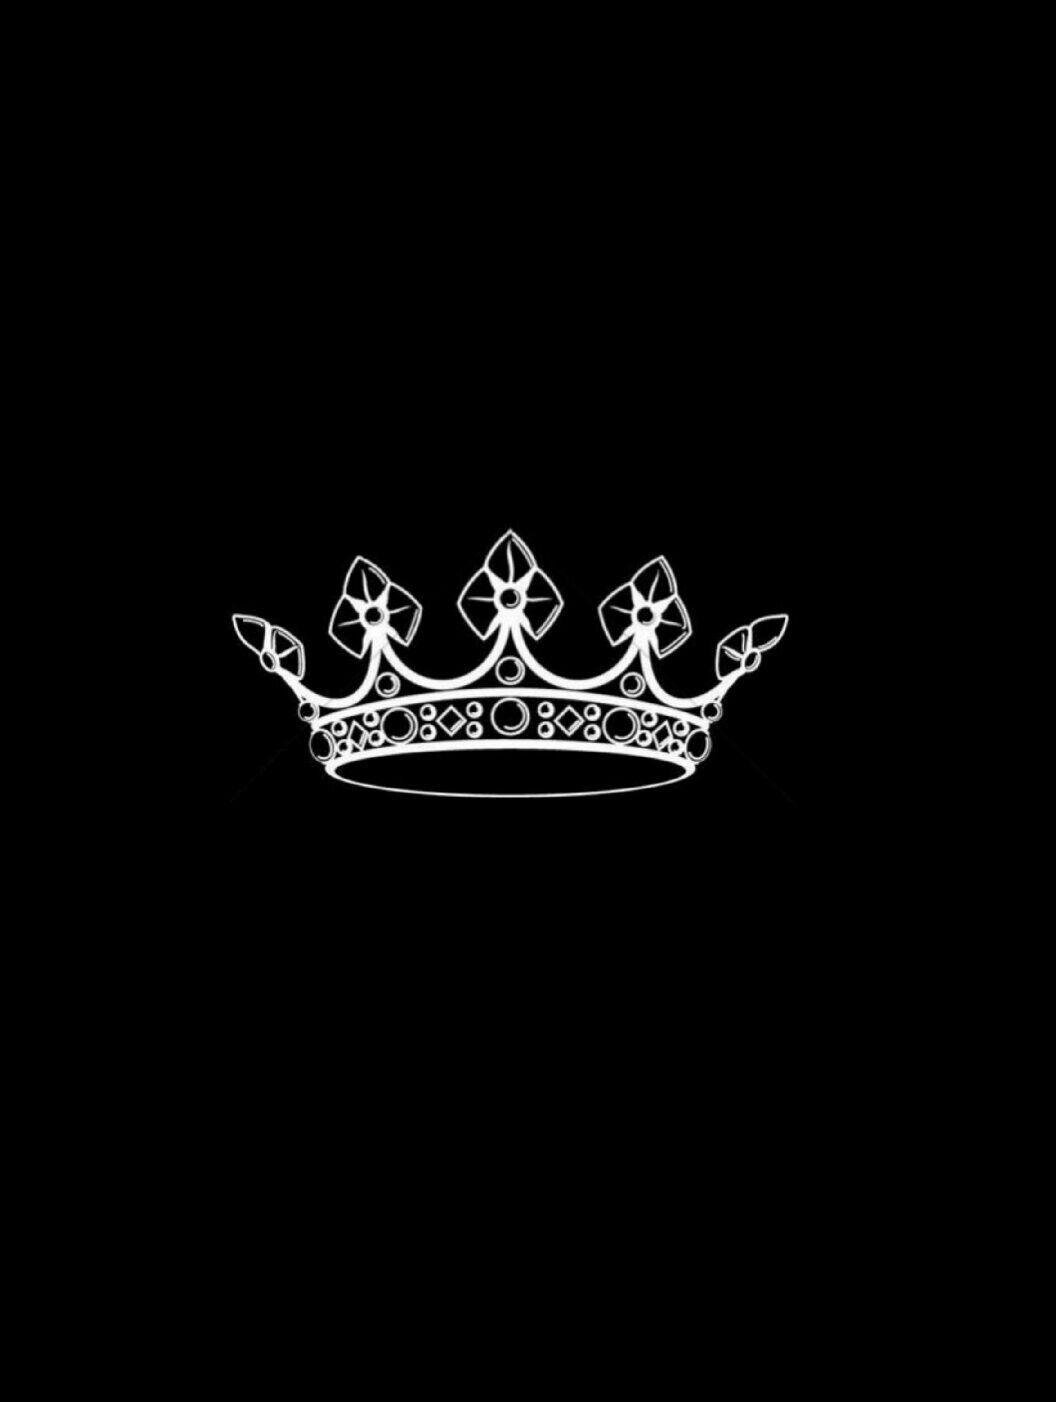 Prince Crown Wallpapers - Top Free Prince Crown Backgrounds ...